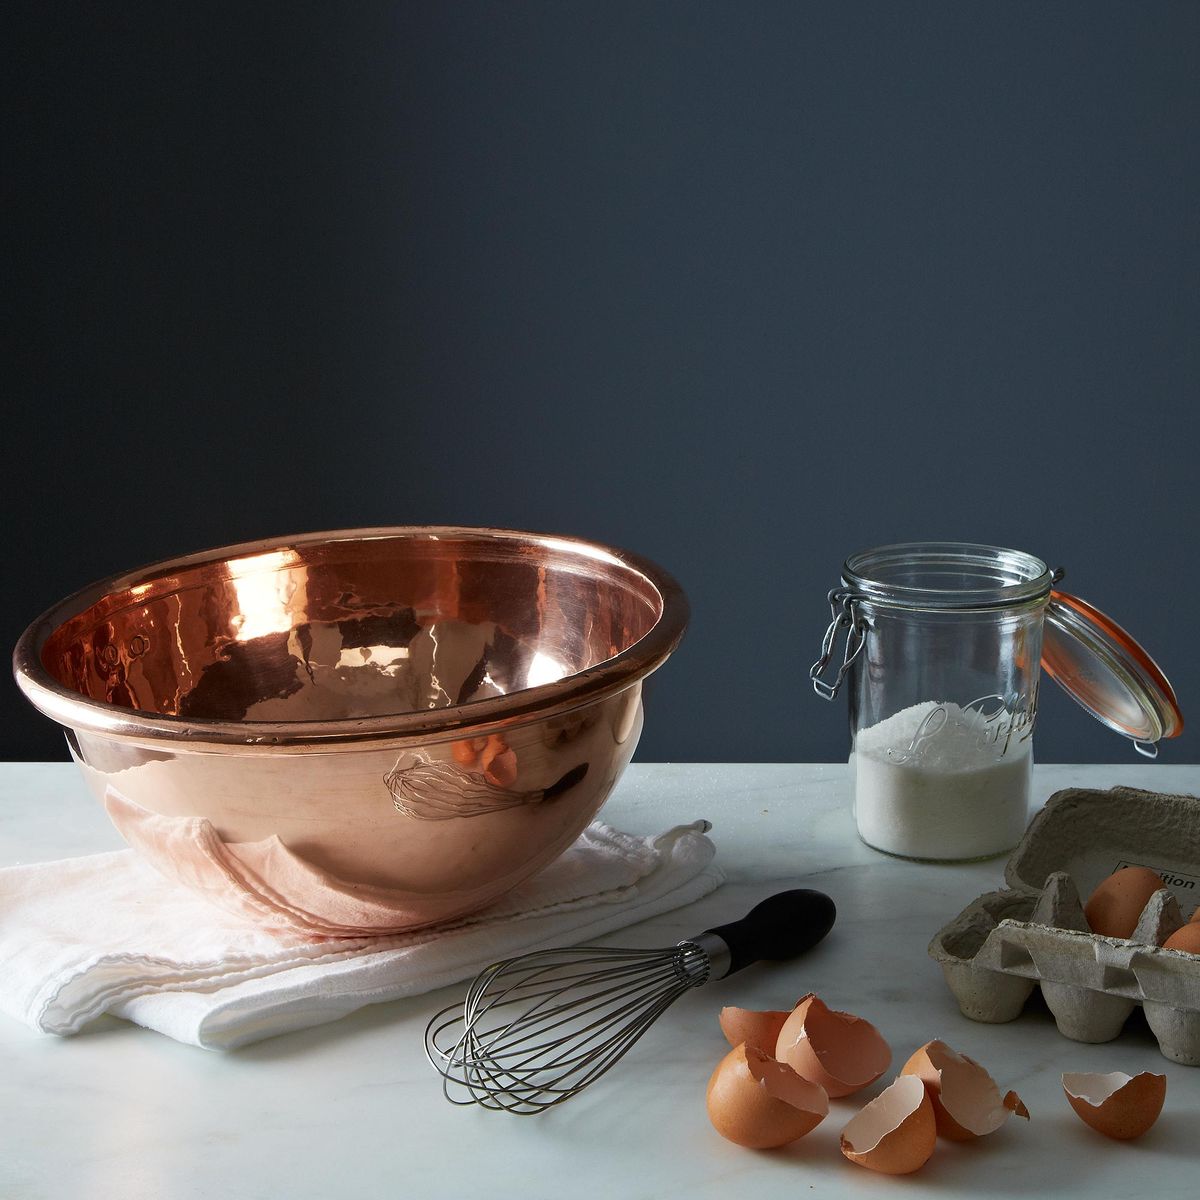 A Guide to Cooking in and Caring for Copper - Food52